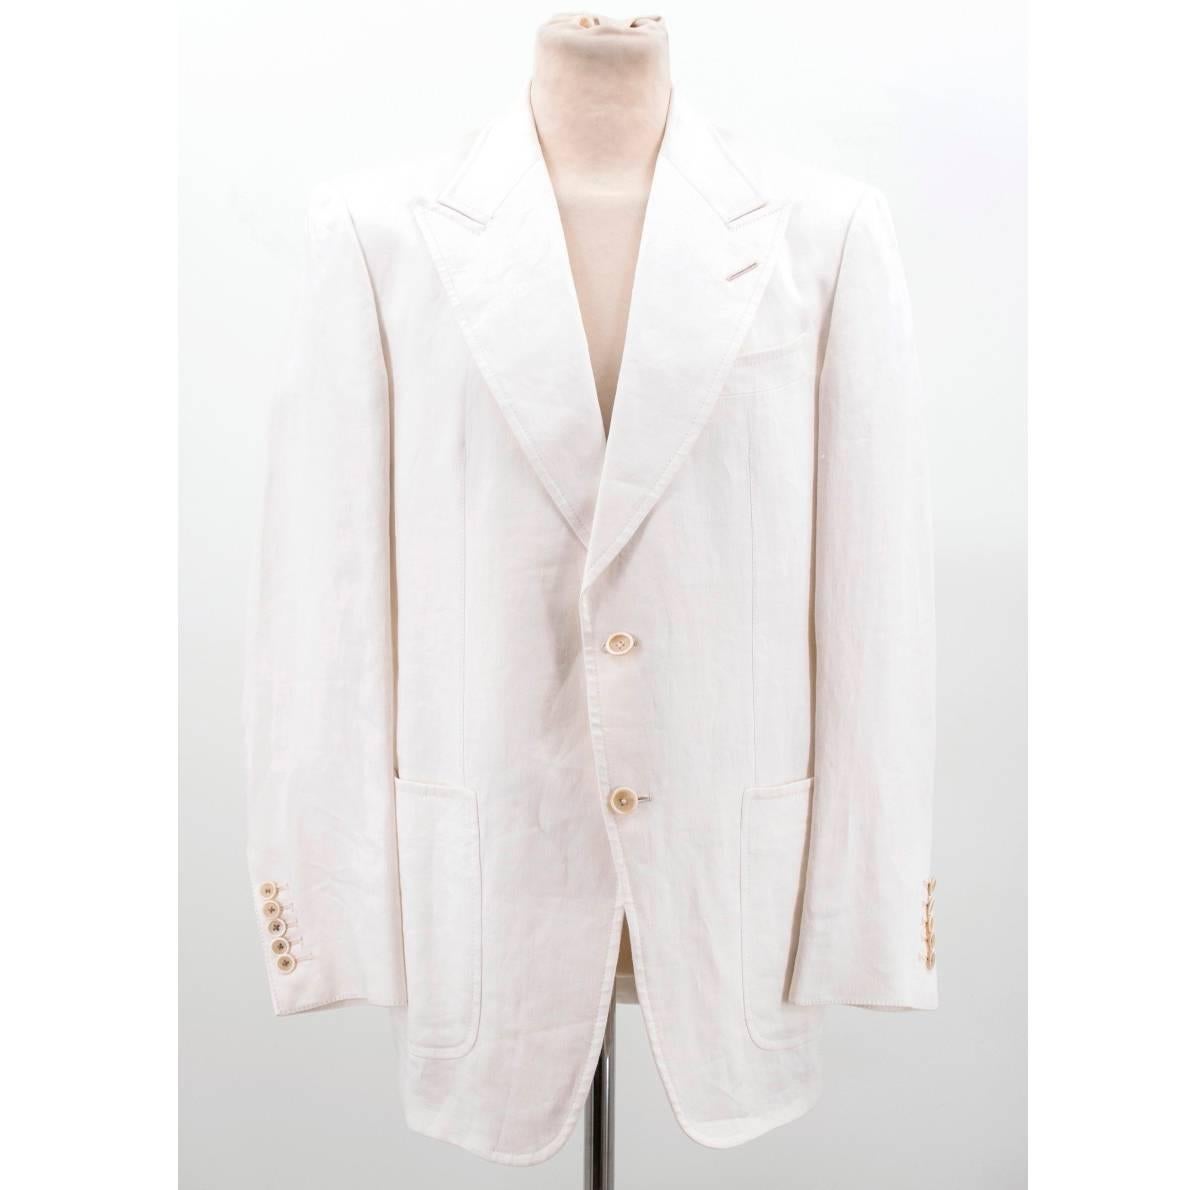 Tom Ford cream linen suit. A single-breast jacket with 2 front pockets and a chest pocket with a two button closure. The trousers are slim fit with turn-ups.

Size: L
Measurements: Approx: Jacket: Chest - 57cm Sleeve - 47cm Length - 81cm. Trousers: